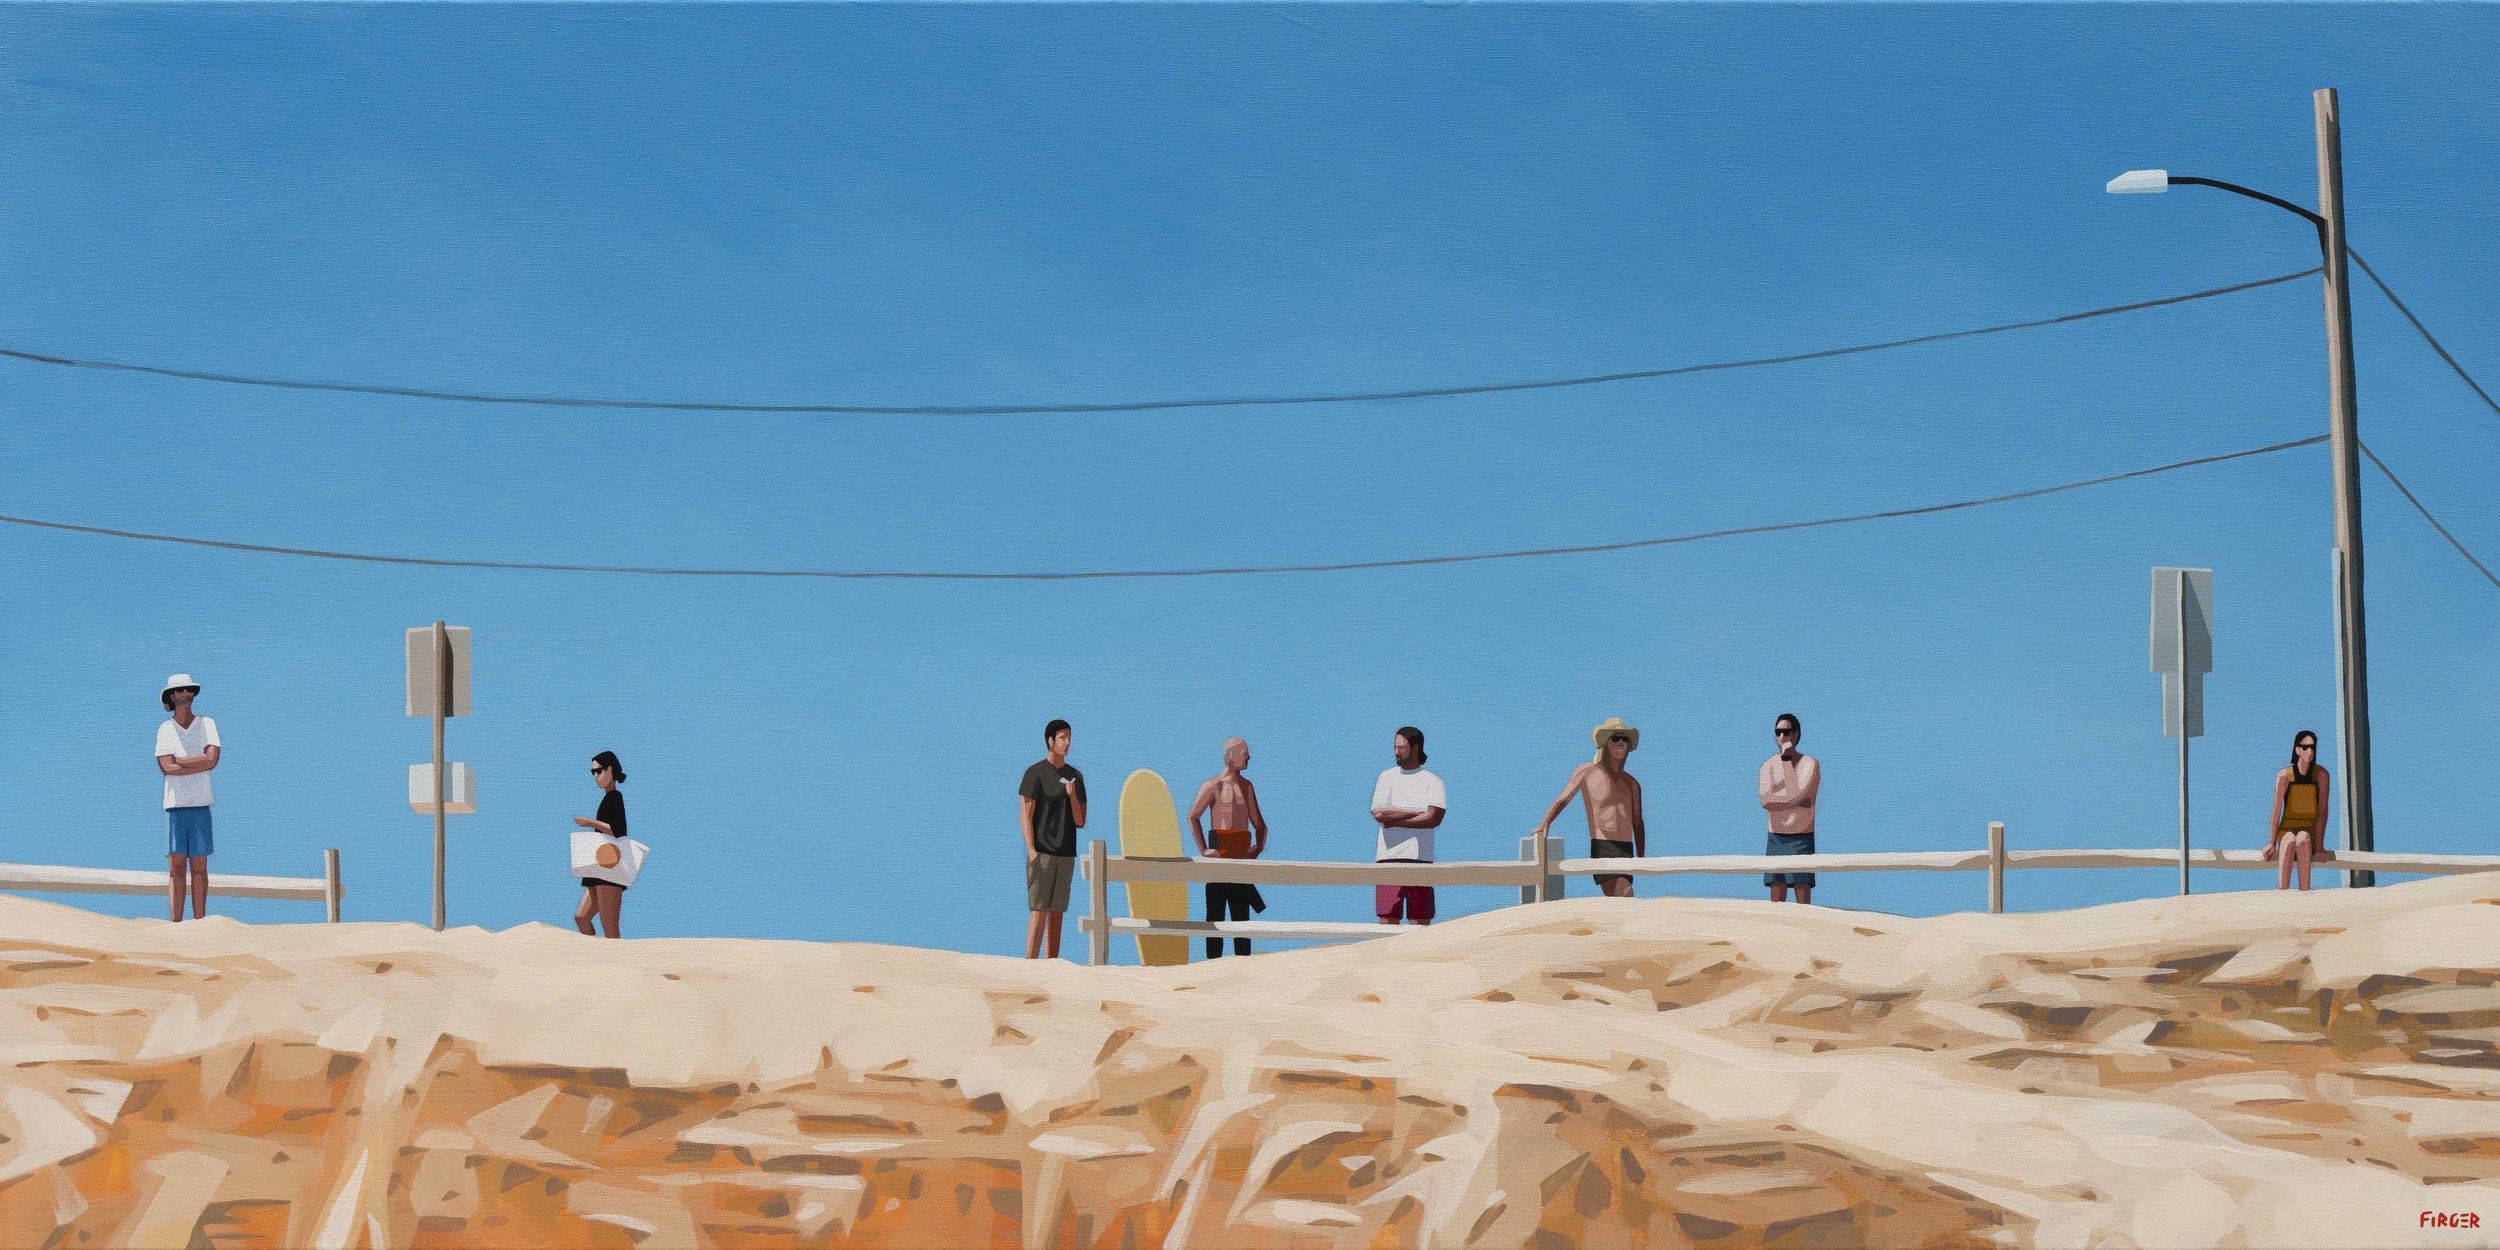 Locals - 24 x 48, Acrylic on Canvas (SOLD)